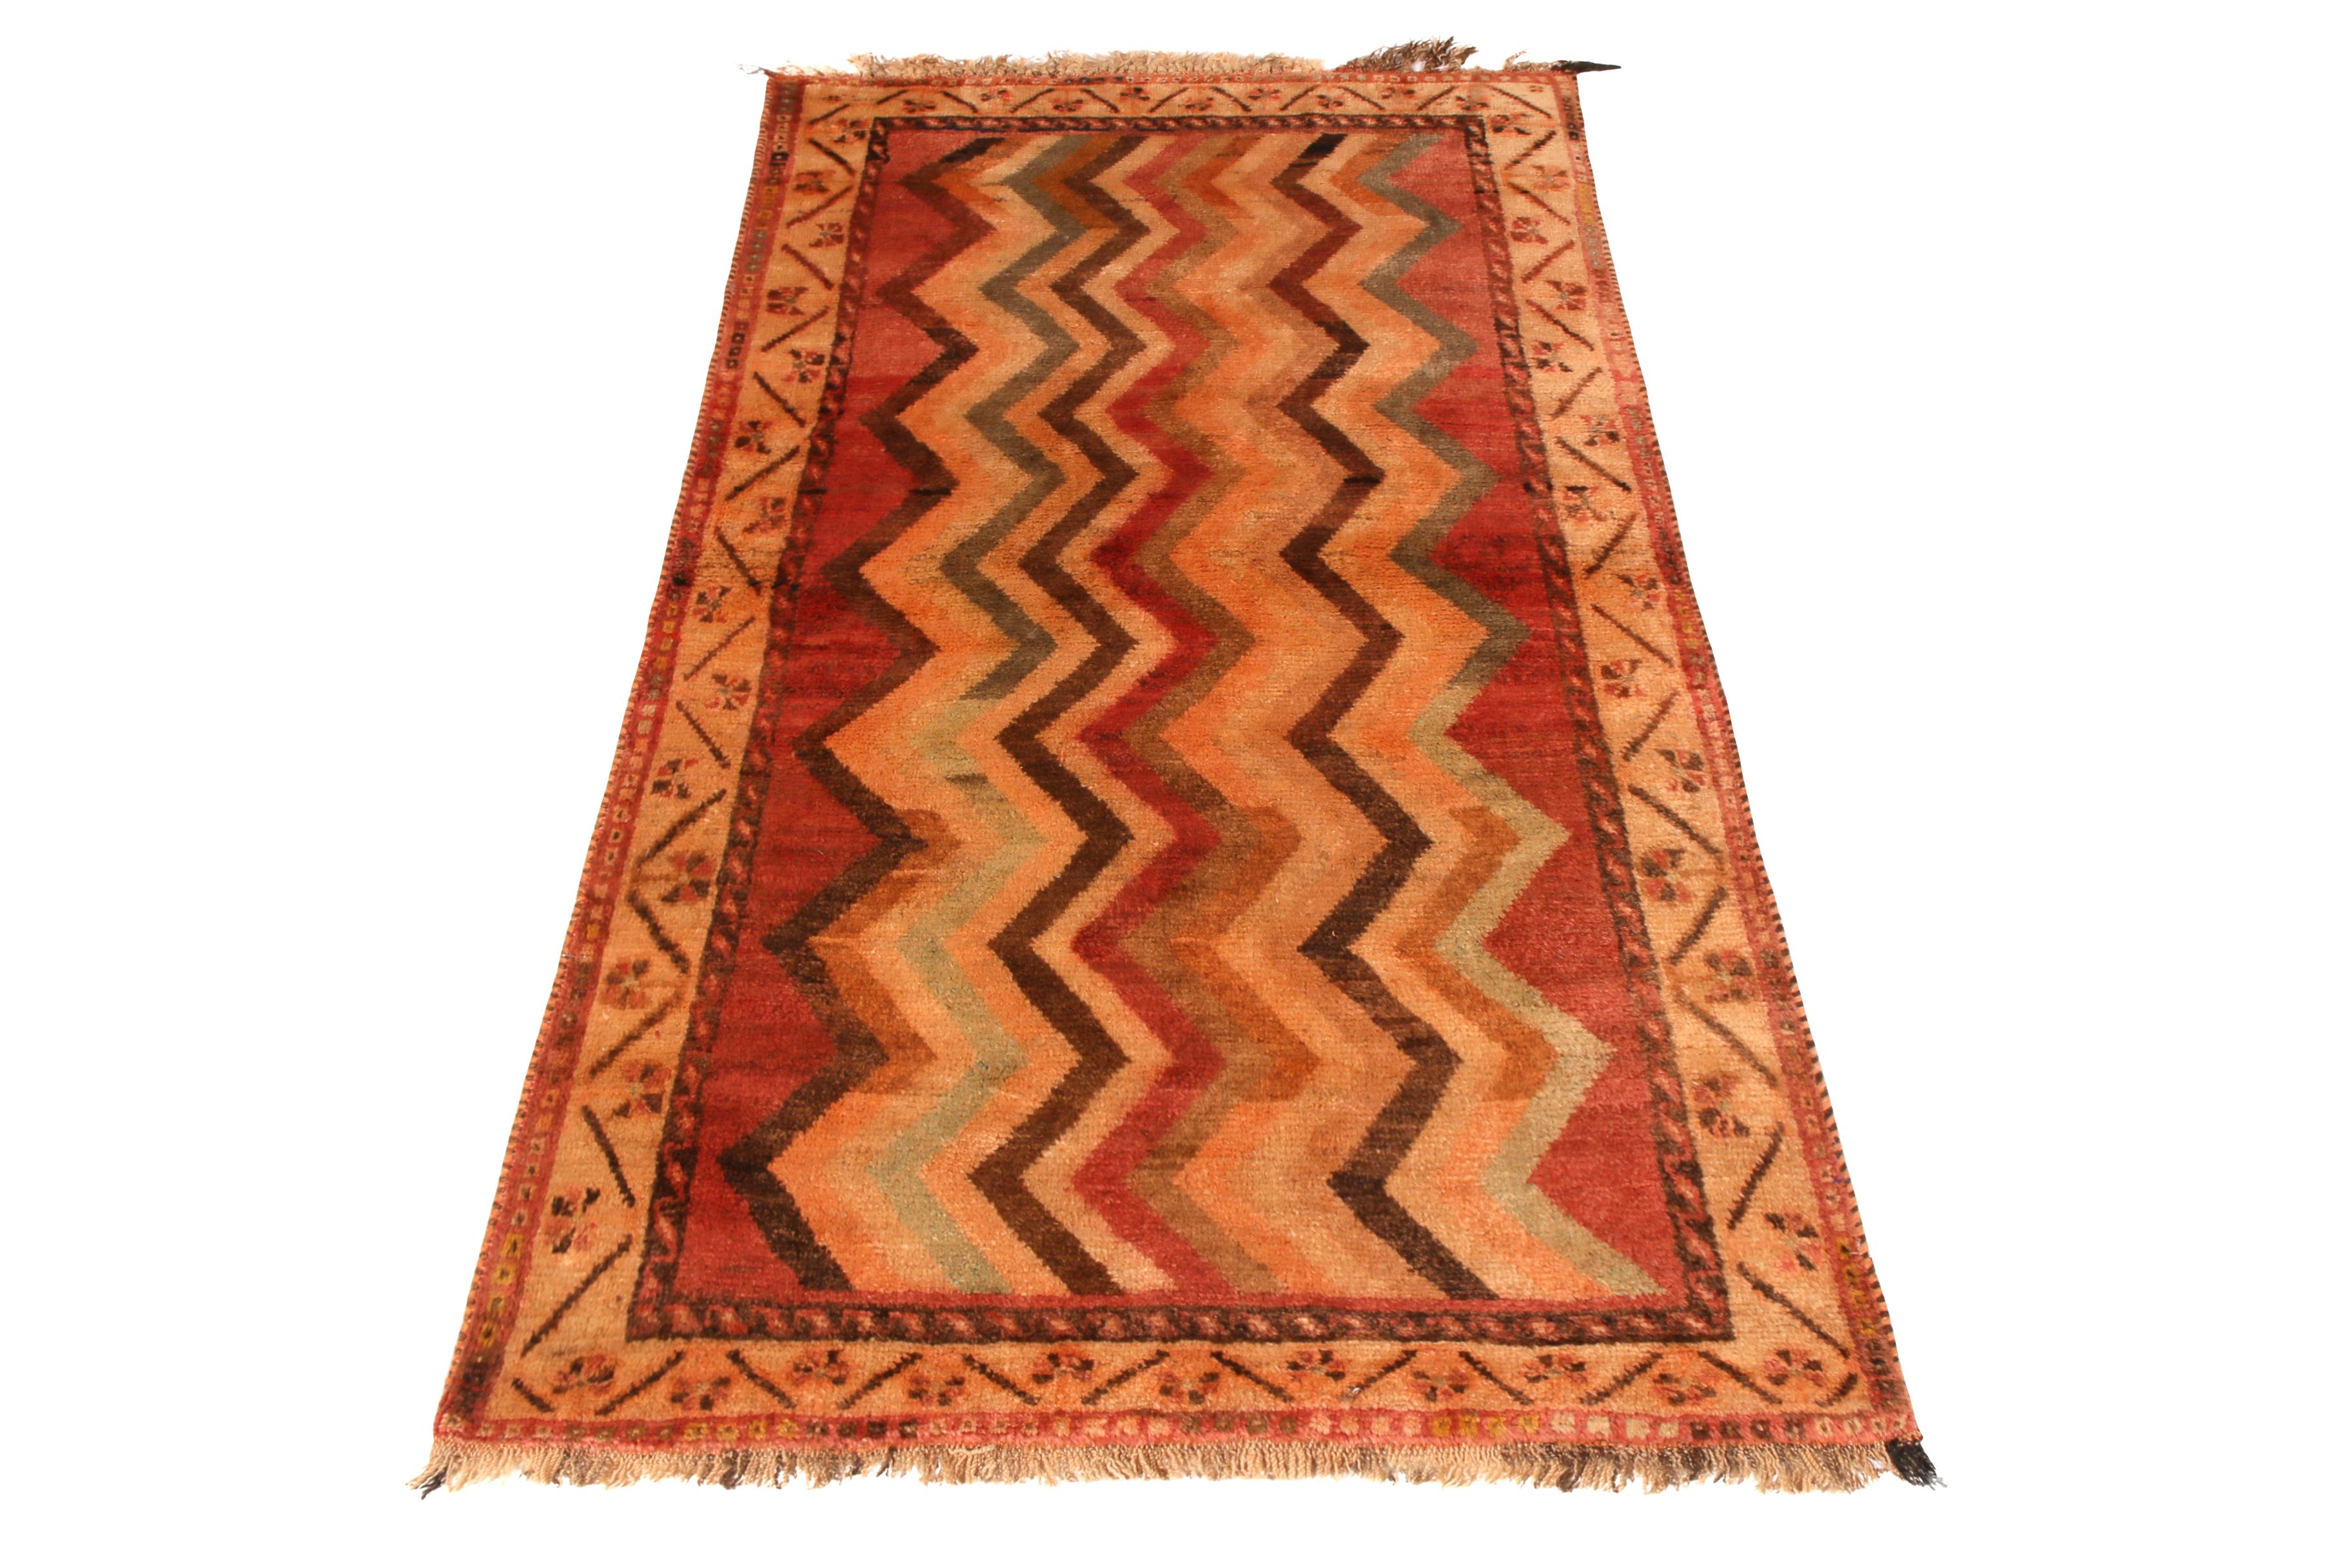 Made with hand knotted wool and originating between 1910-1920, this antique Gabbeh Persian rug celebrates the individuality of each piece in this respected lineage of handmade rugs, recapturing the Classic all-over chevron pattern renowned among